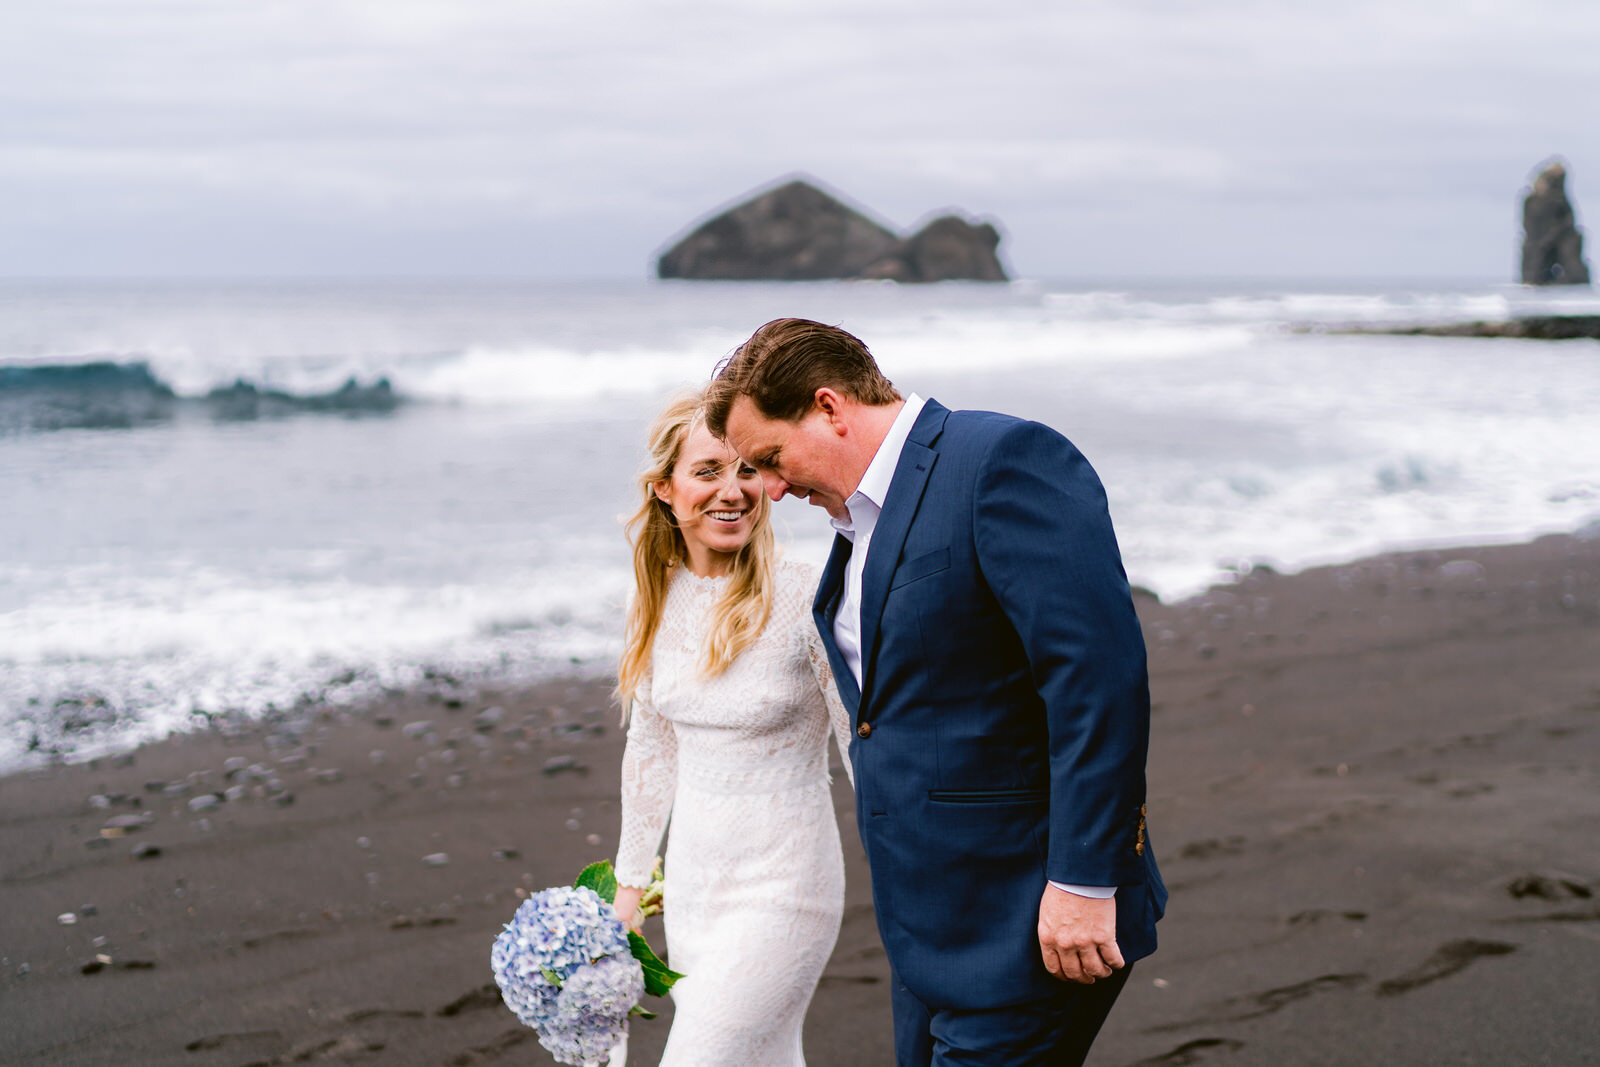 Elopement in the Azores. Cpuple getting married in Portugal. Elopement photography in Europe. Epic locations to elope in the world. Sao Miquel island Azores wedding (17).jpg